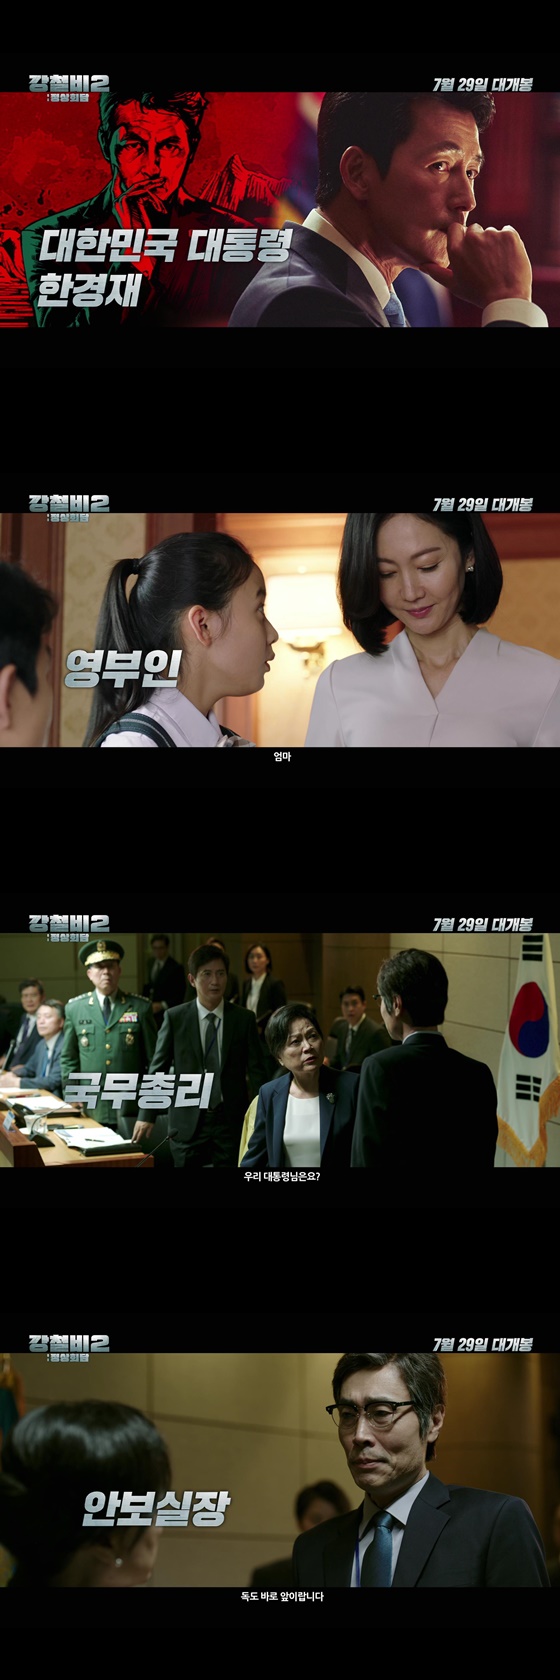 On the 13th, Lotte Entertainment released a character trailer for Steel Rain 2: Summit.The movie Steel Rain 2: Summit depicts the crisis just before the war that takes place after the three leaders were kidnapped by the nuclear submarines of the North during the North and South American Summit.President South Korea (Jung Woo-sung) is a petty husband who shares his troubles with his daughter and a normal father who is almost deprived of his allowance before being the supreme leader of a Europe, and shares his drink with the first lady (Yeom Jung-ah), and can be seen as the most comfortable and human charm when he is with his family.On the other hand, I feel sad that I can not do anything as President of South Korea, a division party, like the ambassador I have been invited to this peace talks but we have no place to sign, but the fact that I am in a hurry to narrow the gap between the two leaders of North Korea and the US,At the time of efforts to establish a peace regime in Korean Peninsula, South Korea will be trapped in North Nuclear submarines along with the North and the US leaders.South Koreas Prime Minister (Kim Yong-rim), the Security Chief (Lee Jae-yong) and the Minister of National Defense (the Guide) are the first to take care of the presidents safety and respond quickly, showing the solid South Koreas inner workings even in the absence of the president and raising expectations that it will add to the vitality of the drama.On the other hand, Kwak Do-won, who played the chief of the escort who caused the coup, thought that the North would live only by continuing the alliance with China, saying, Our Democratic Peoples Republic of Korea is reforming and opening up wrong, and Europe is ruined. He expressed the patriotism and beliefs of North Korean hardliners convincingly with his heavy acting.Here, the appearance of the North Korean chief strategist Baek Doo-ho (Sin Jung-geun) and the captain (Ryu Soo-young) in the submarine battle stimulates curiosity about what they will do between the leaders of the South, North and the US and the escort general, who are confined to the North Nuclear submarines.Finally, Smoot (Angus McFadden) is a United States of America president from a businessman whose priority is to return home with the North Korean nuclear program with the aim of making United States of America great again.The United States of America President Smoot, who is trapped in a narrow captains room but does not hesitate to speak to North Korean soldiers who threaten him with a self-centered attitude, American First, is curious with a variety of tensions and comics.Also, the appearance of United States of America Vice President (Christine Dalton) and United States of America Secretary of State (Colby French) who are the first to check emerging powerhouse China and do not hesitate to launch ICBM (Intercontinental Ballistic Missile) in the face of the kidnapping of South, North and US clean-up images is the issue of Korean Peninsula, It is predicted that it will spread to war that threatens peace all over the world, raising the sense of urgency.It is noteworthy that the characters will create a drama in the drama, as they have shown different interests in different ways, moving the fate of the South, the North and the U.S.Meanwhile, Steel Rain 2: Summit will be released on the 29th.